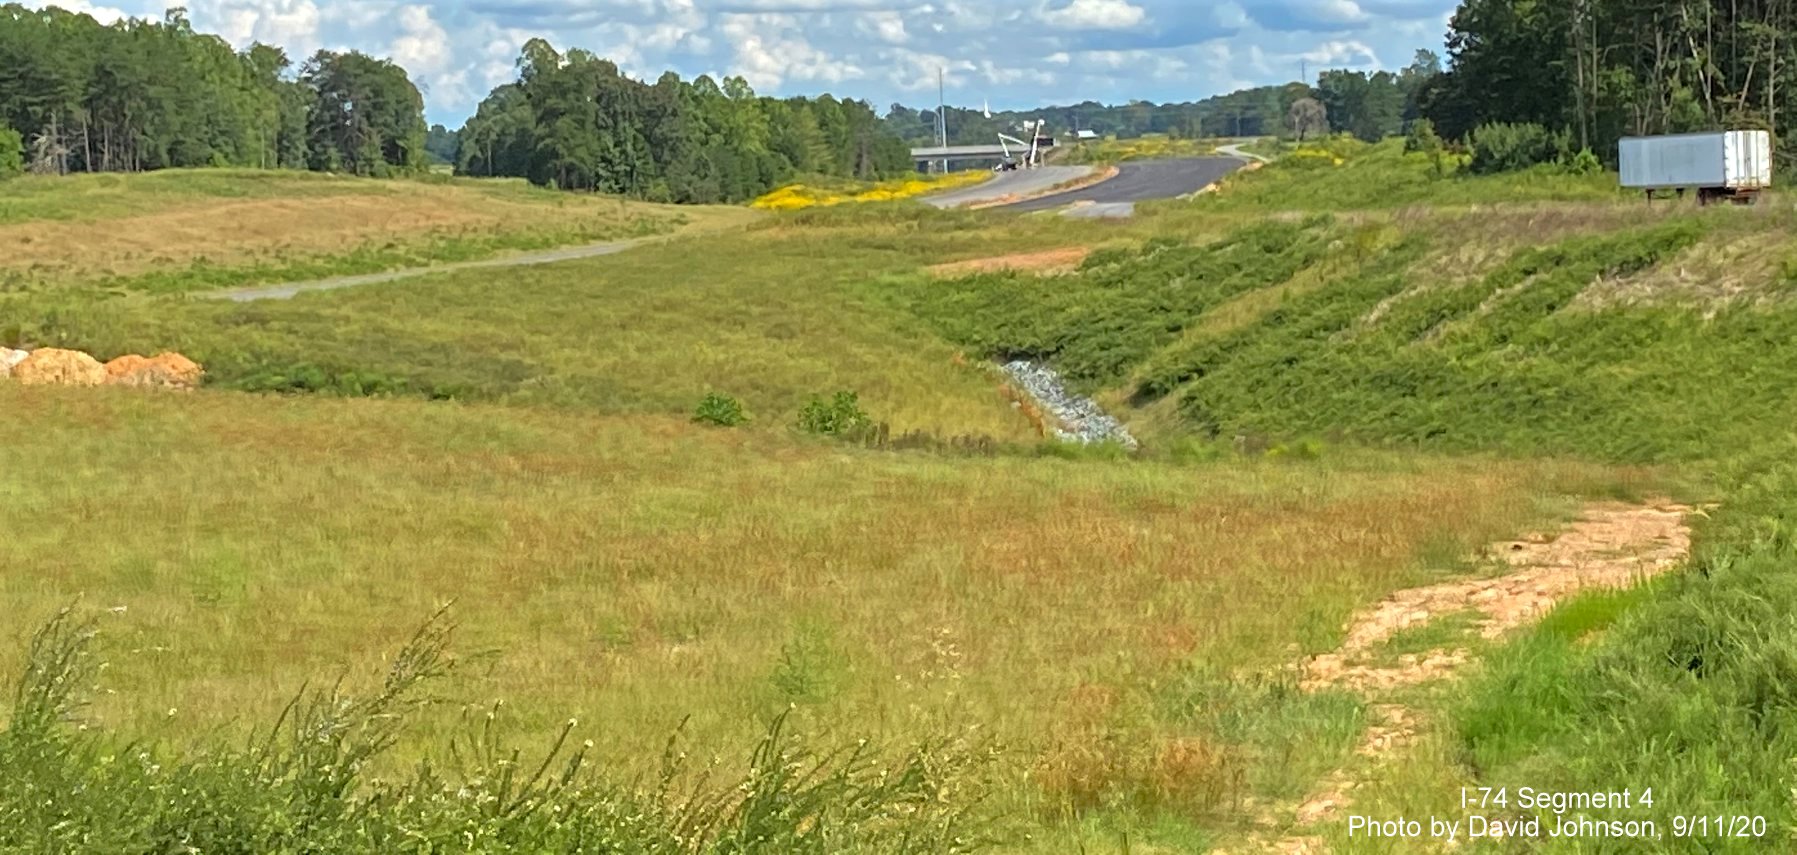 Image looking east from future US 311 bridge over I-74 Winston Salem Northern Beltway looking east, by David Johnson September 2020